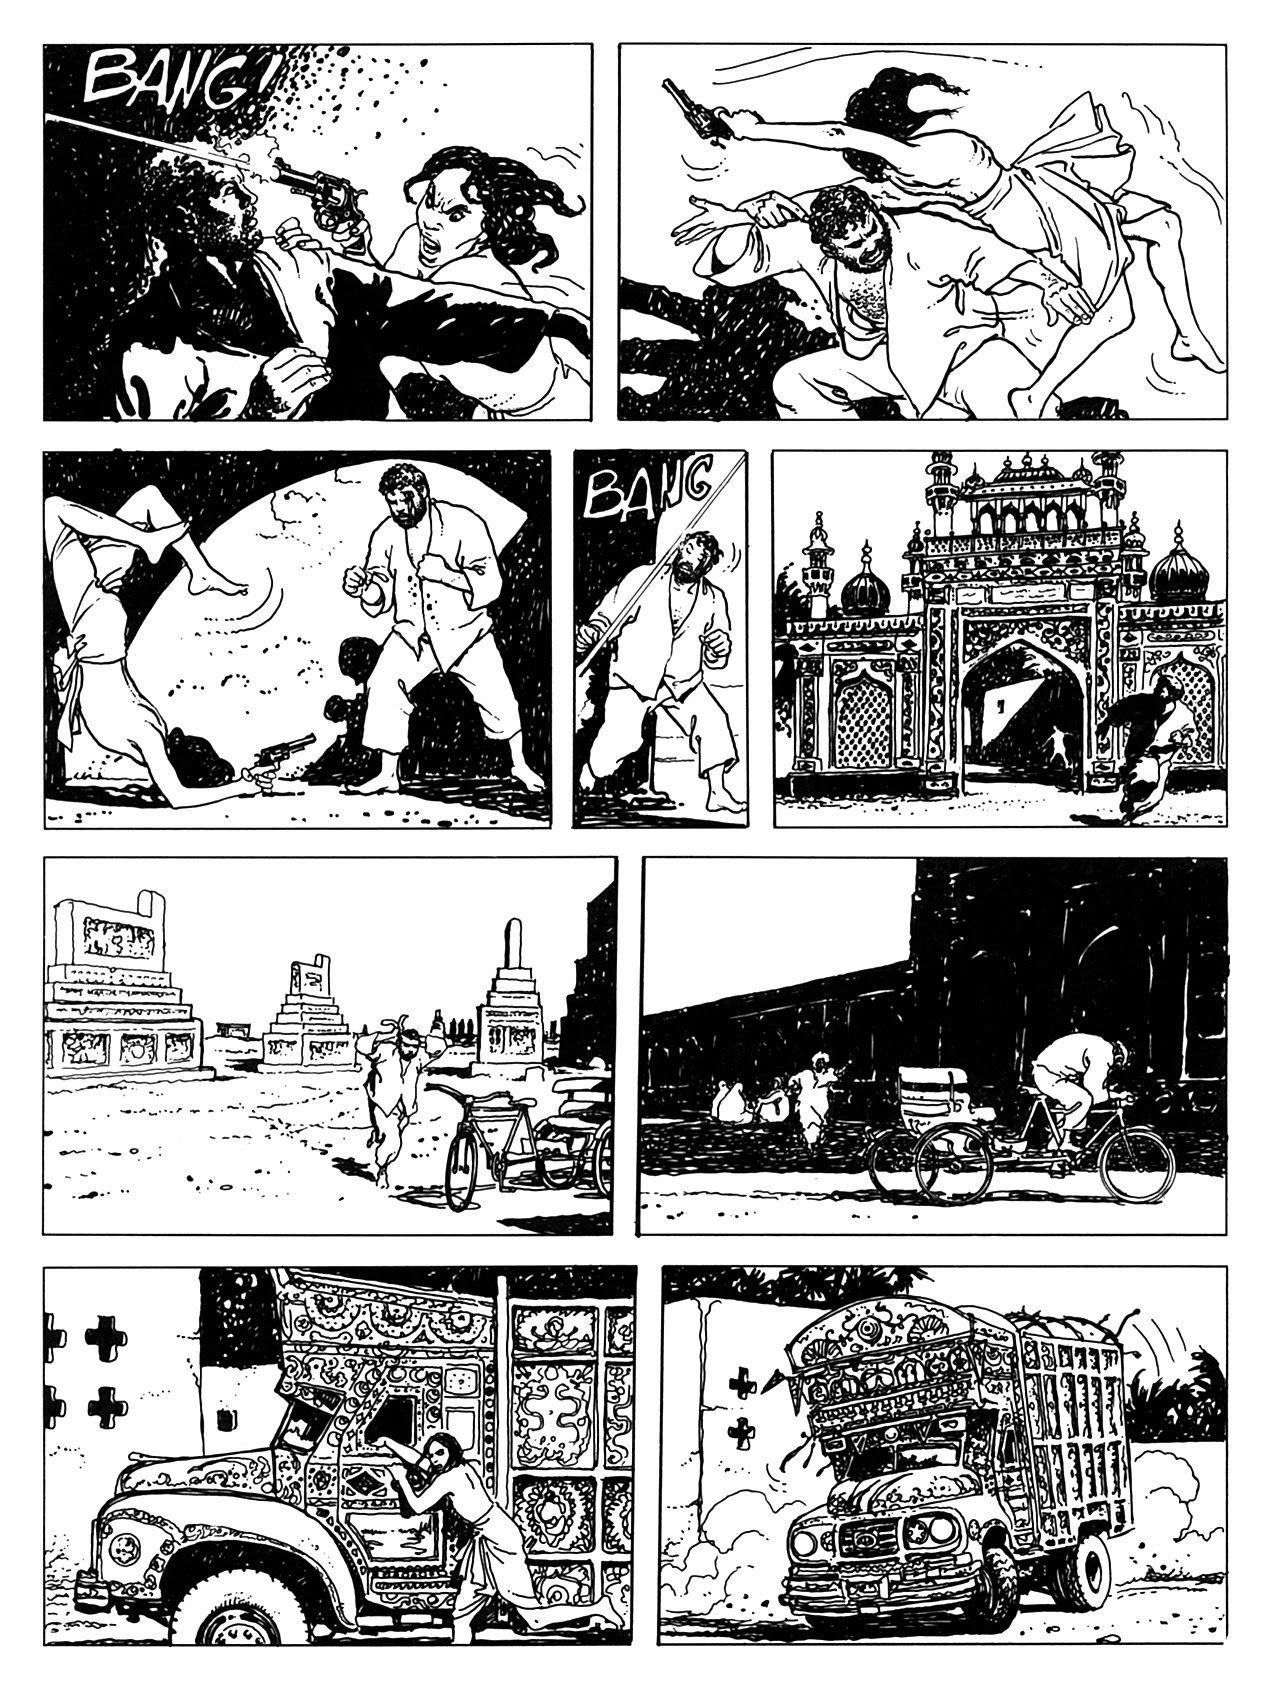 Read online Perchance to dream - The Indian adventures of Giuseppe Bergman comic -  Issue # TPB - 90